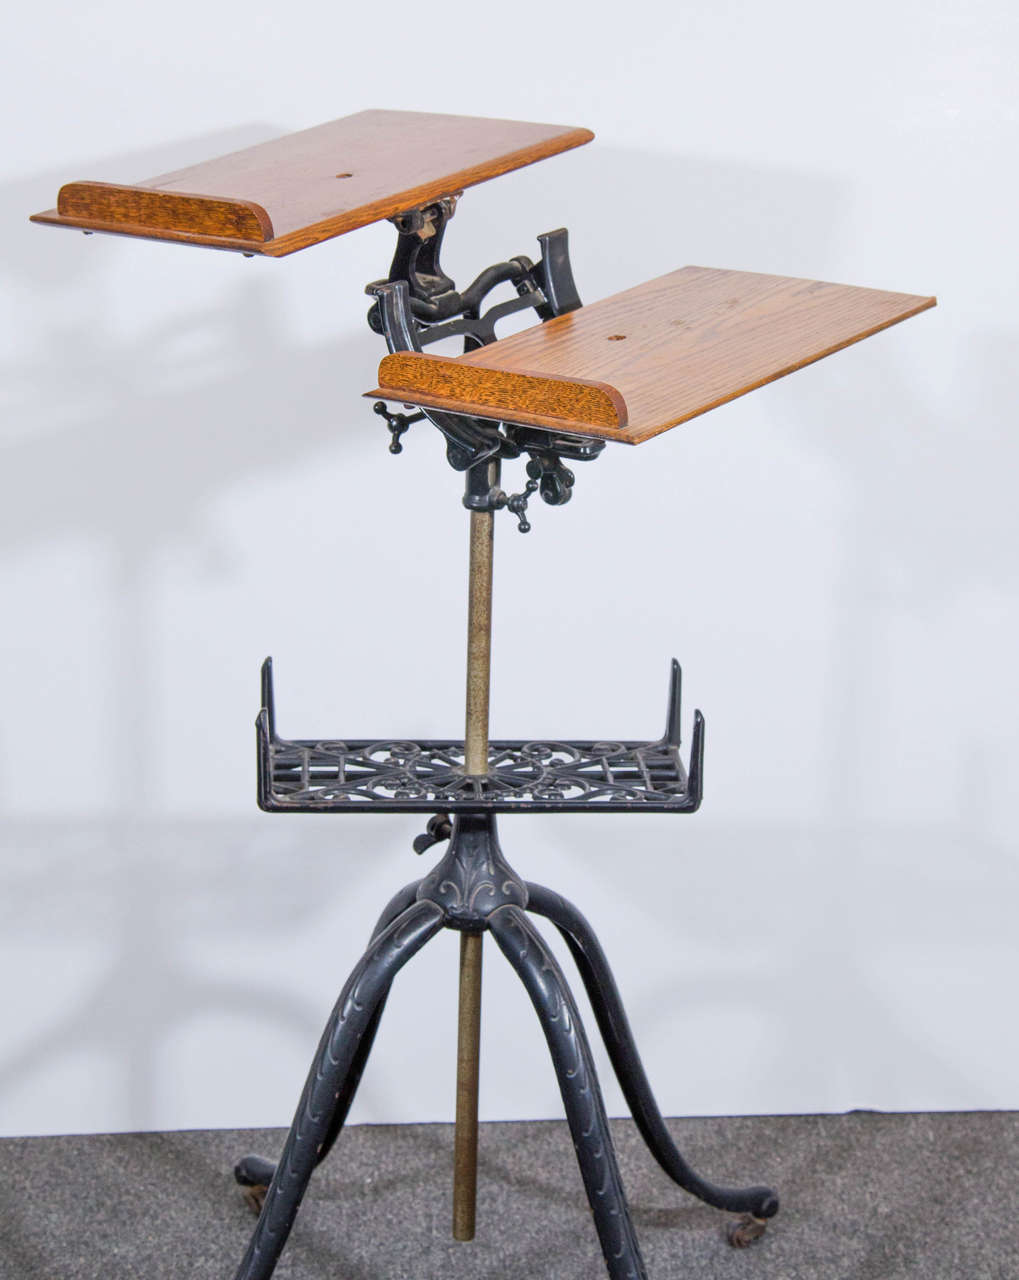 An antique iron and oak adjustable height dictionary stand. Can also be used as a book, menu, or music stand.

Good condition with age appropriate wear and patina. Some nicks to wood.

23